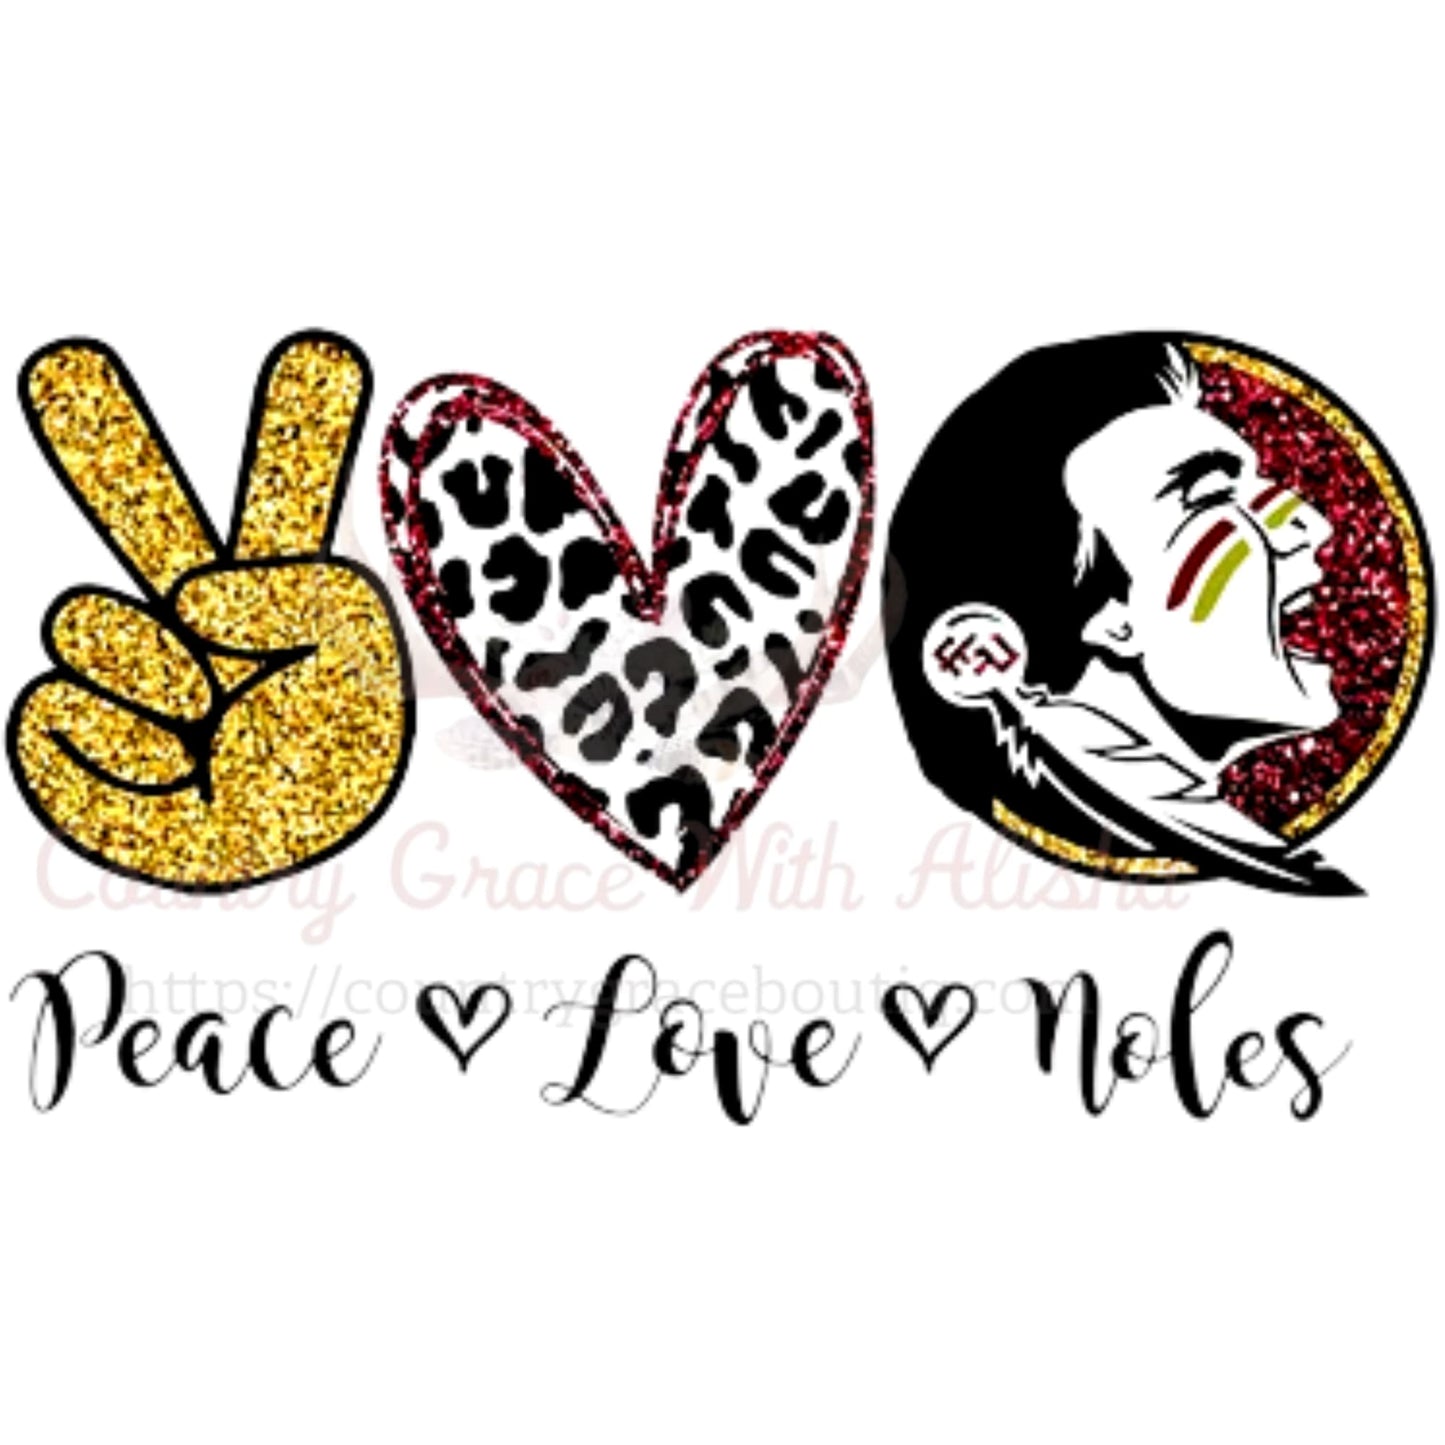 Peace Love Noles Sublimation Transfer - Sub $1.50 Country 